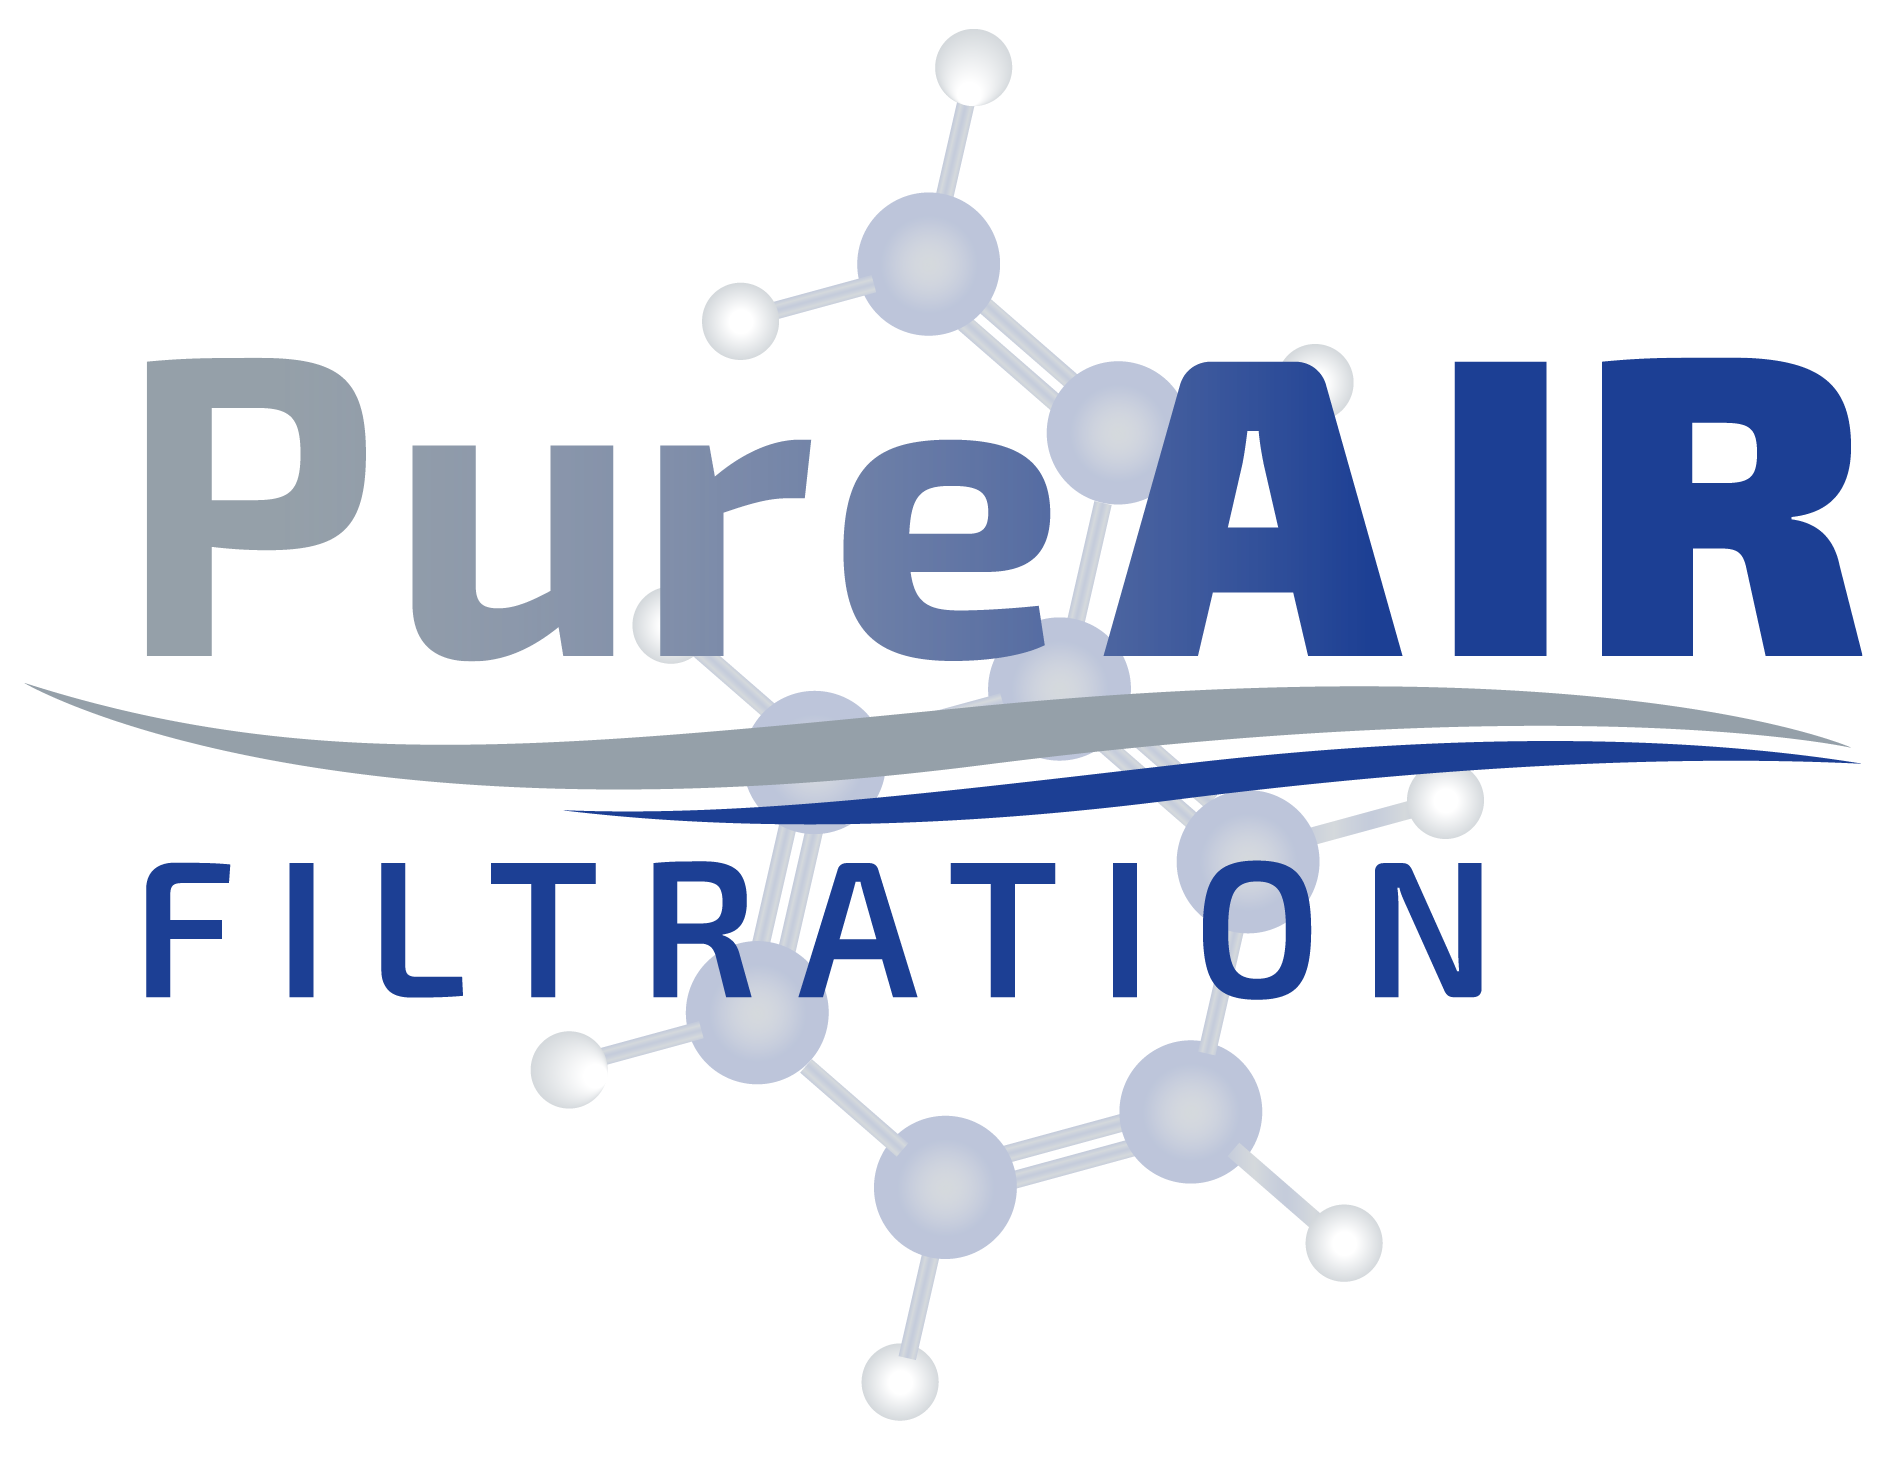 Pure Air Filtration